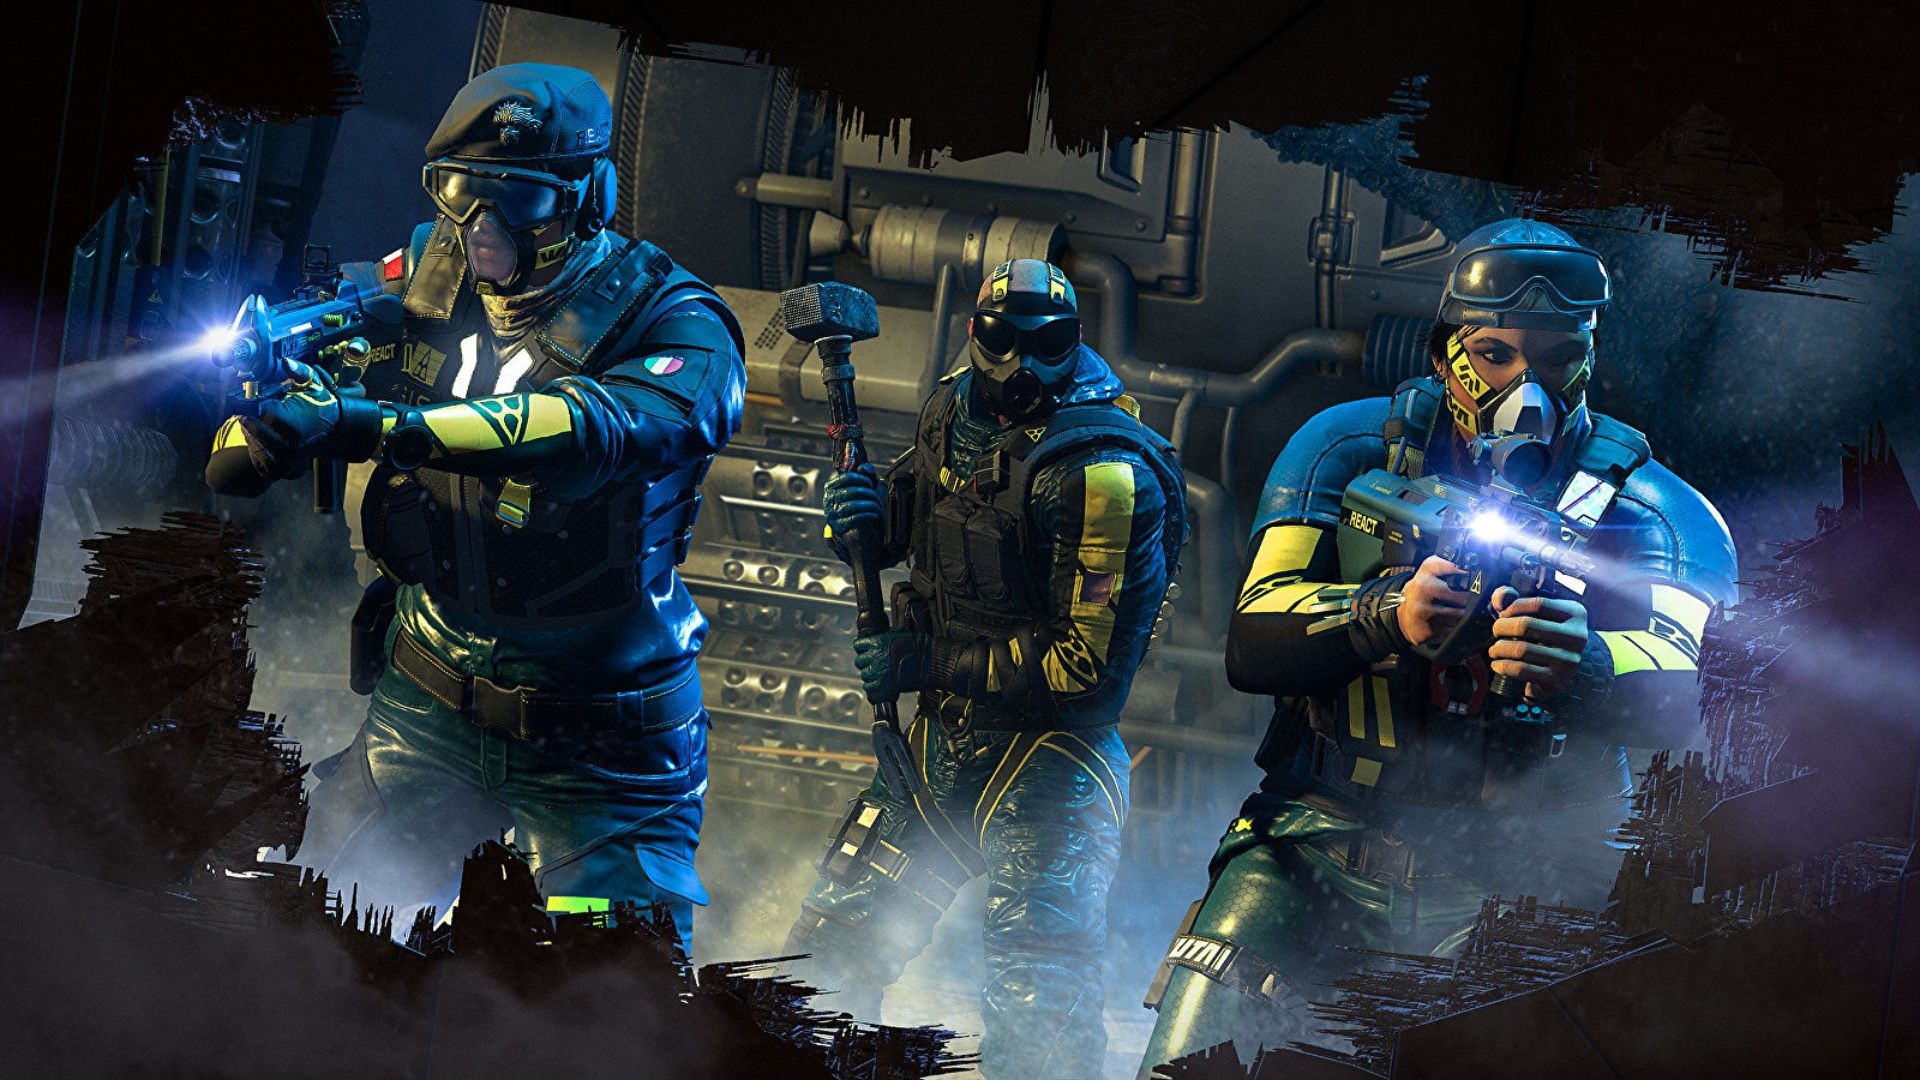 Rainbow Six Extraction: A spin-off of Tom Clancy's Siege, A cooperative multiplayer game. 1920x1080 Full HD Wallpaper.